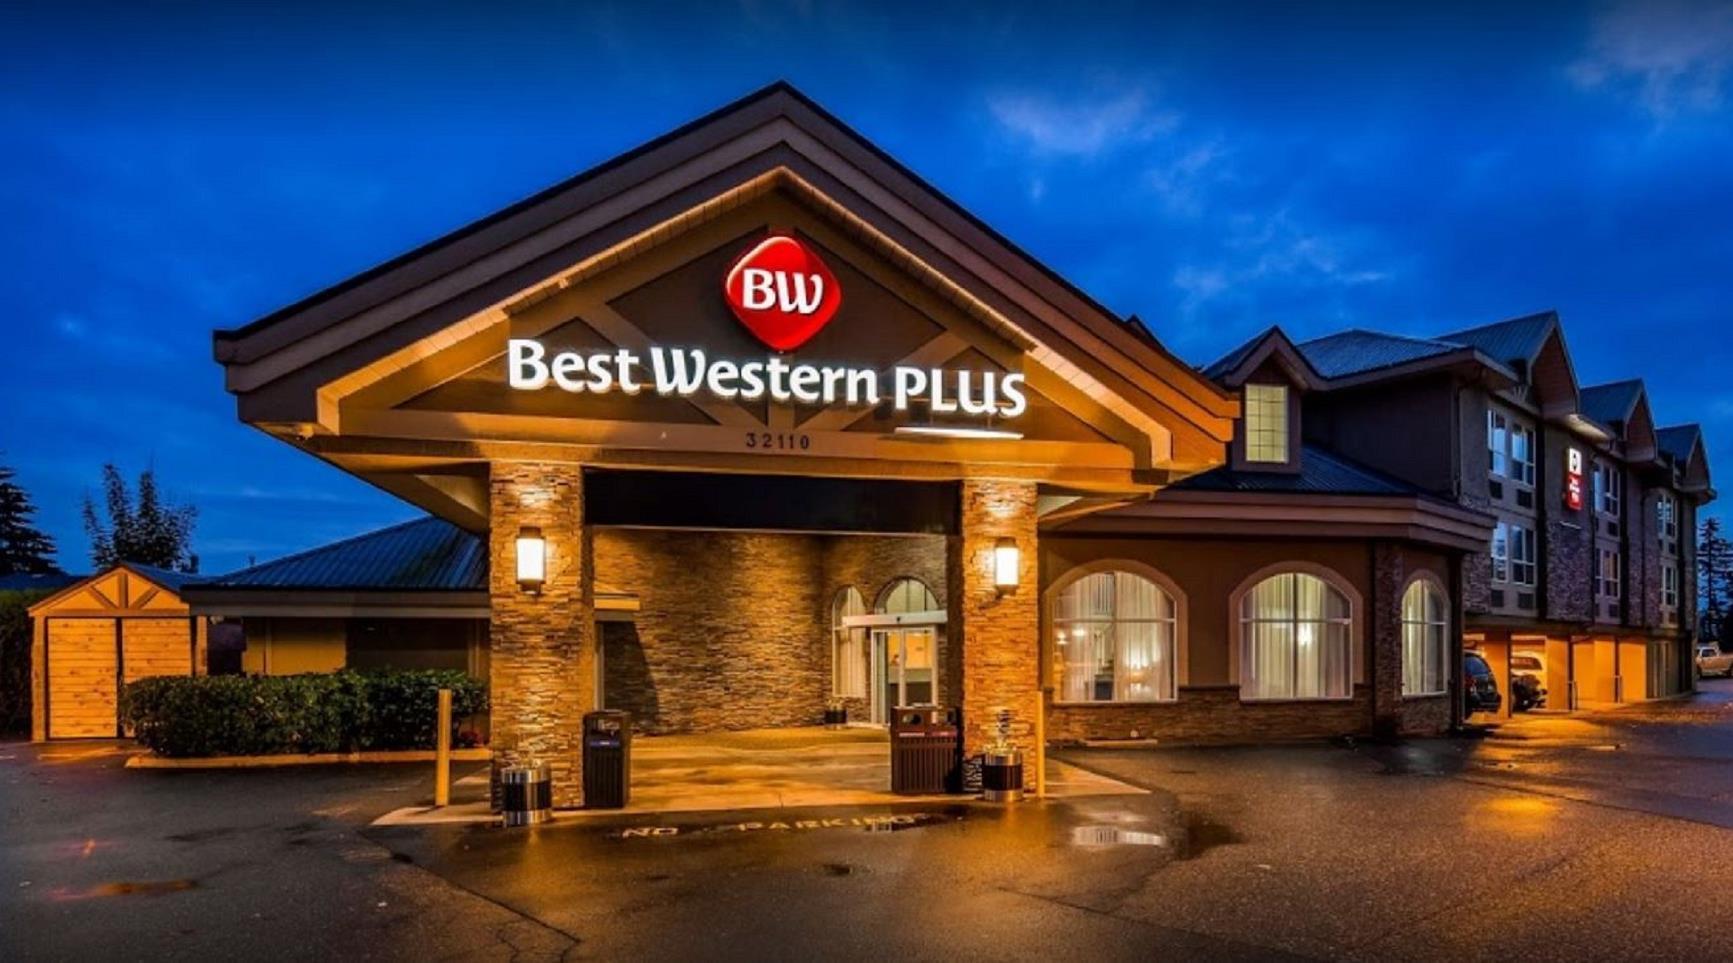 Best Western Plus Regency Inn & Conference Centre in Abbotsford, BC